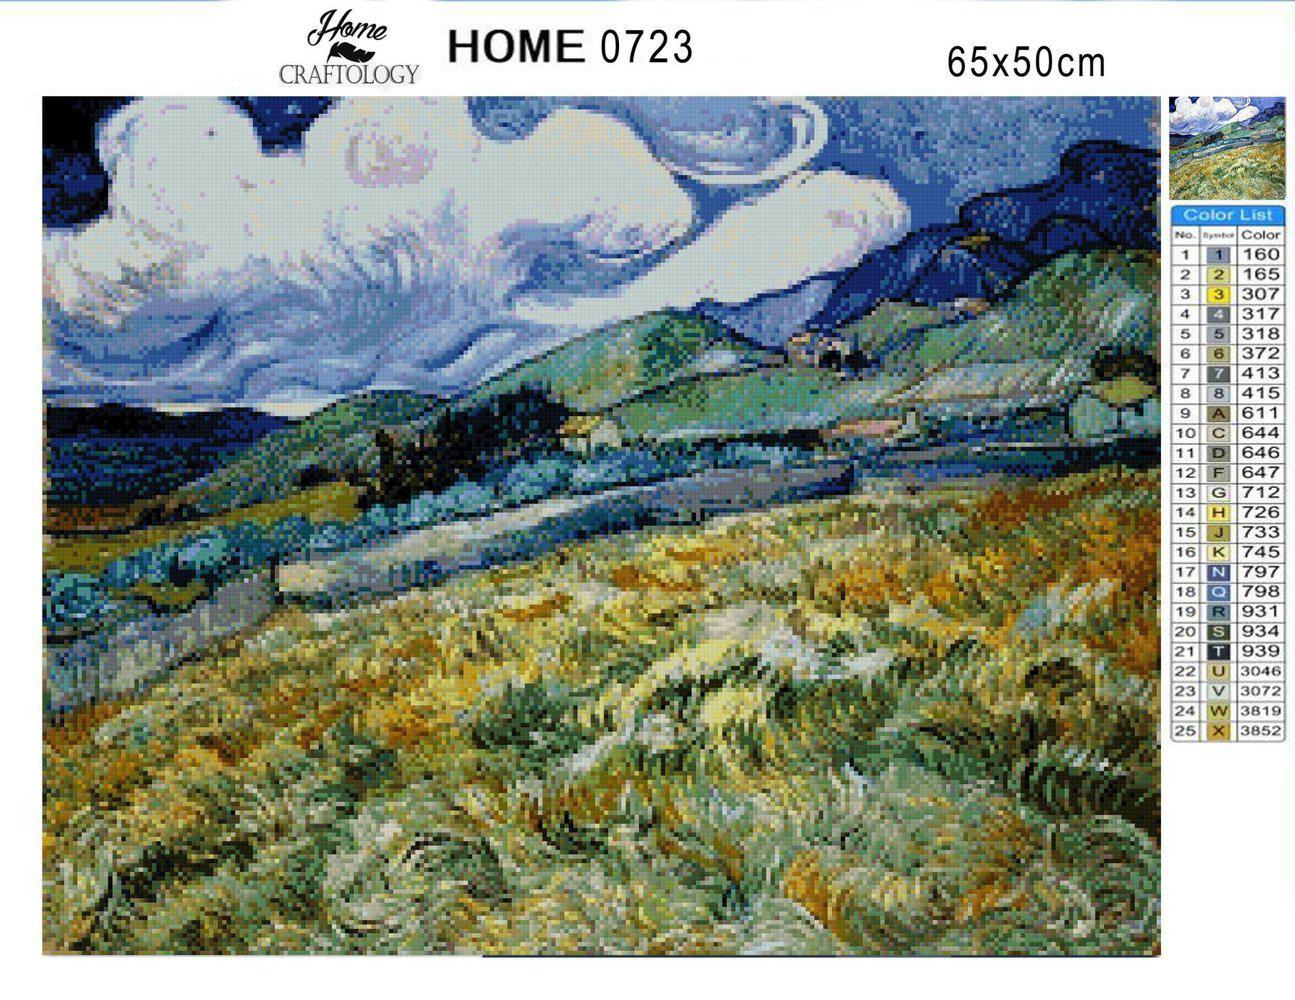 Landscape from Saint Remy - Diamond Painting Kit - Home Craftology